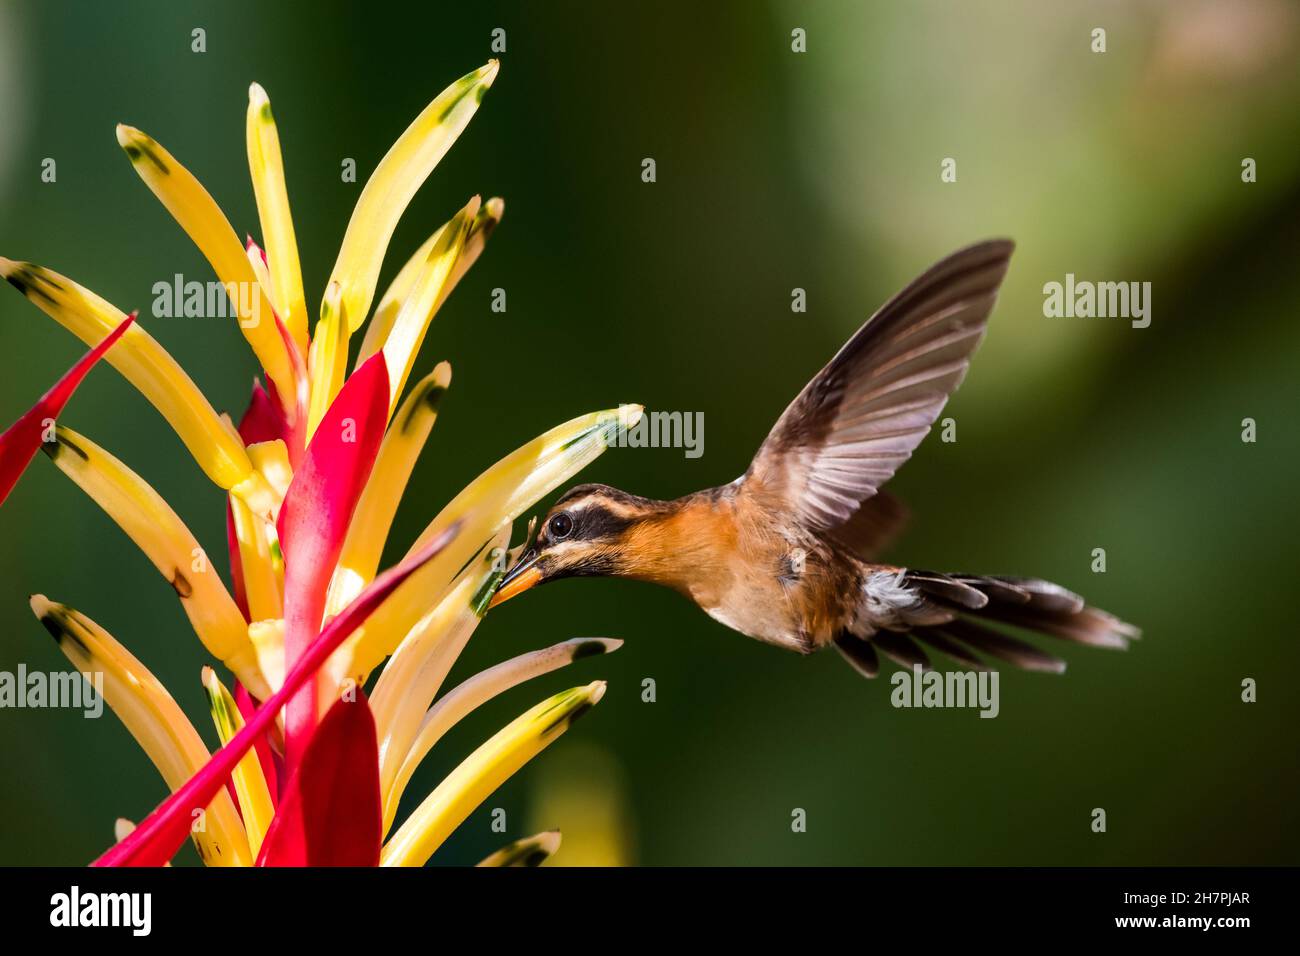 Small brown Little Hermit hummingbird, Phaethornis longuemareus, feeding on a bright Heliconia flower with a dark green background. Stock Photo